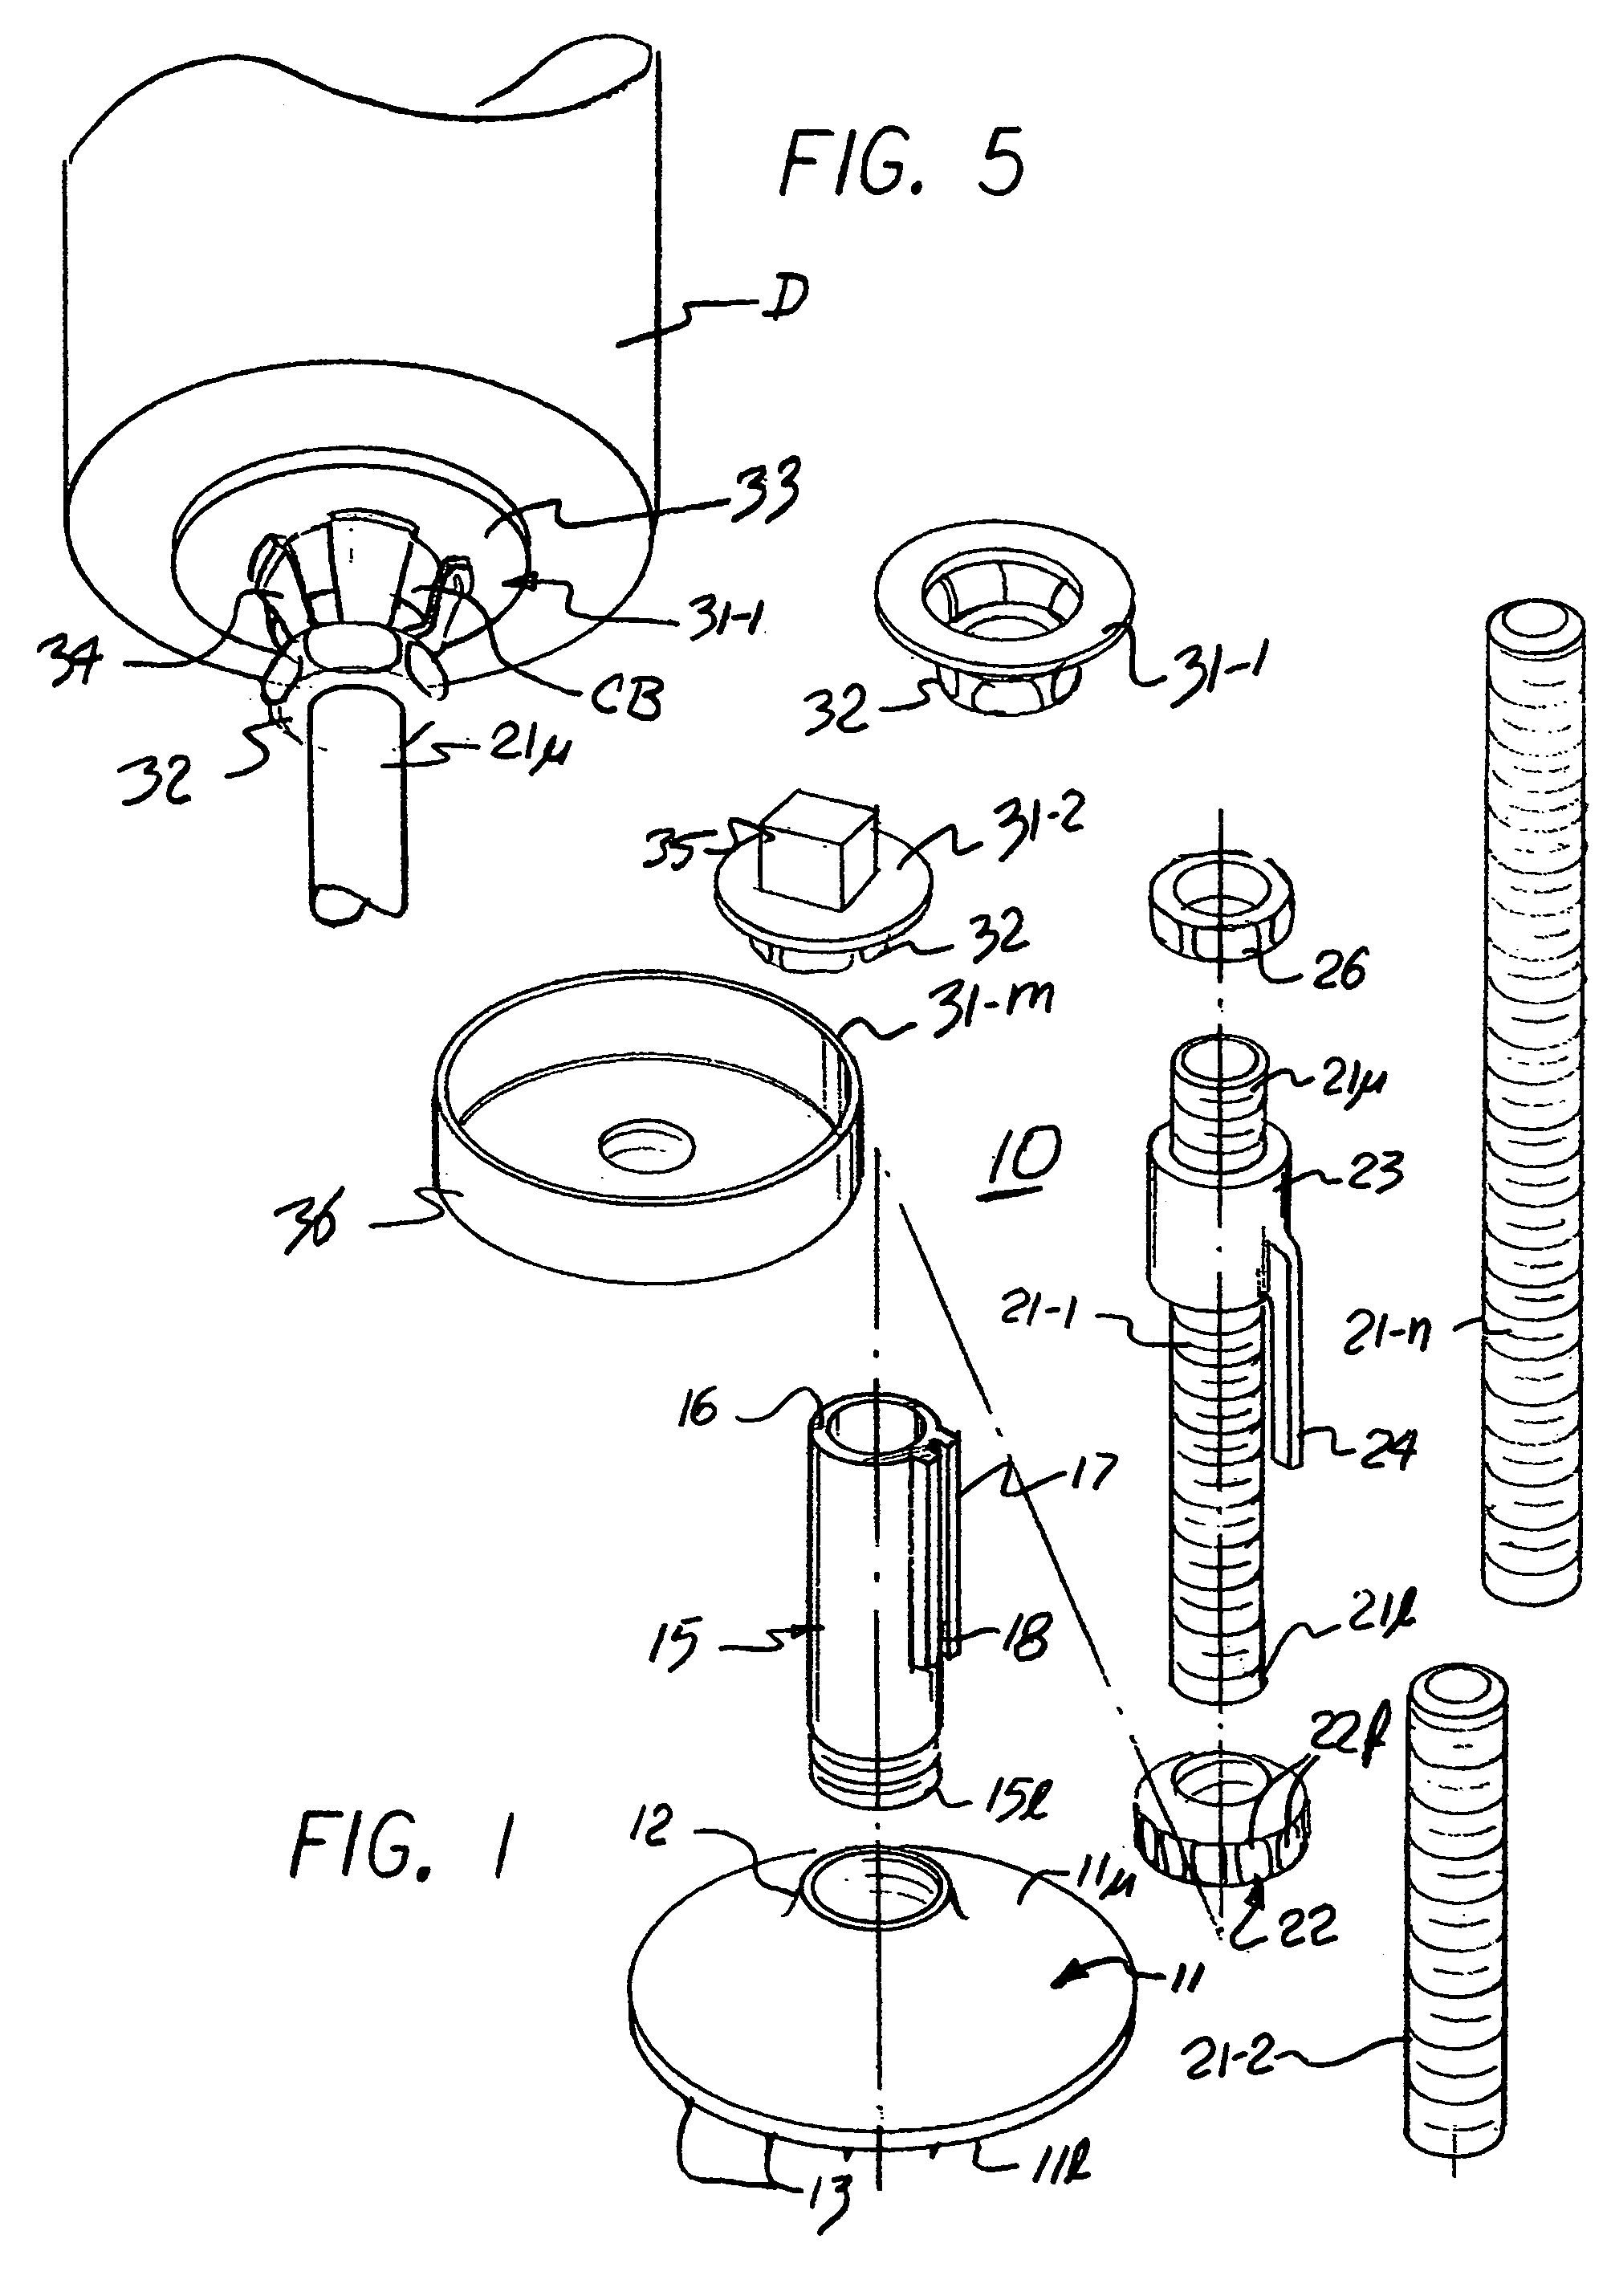 Adjustable support assembly